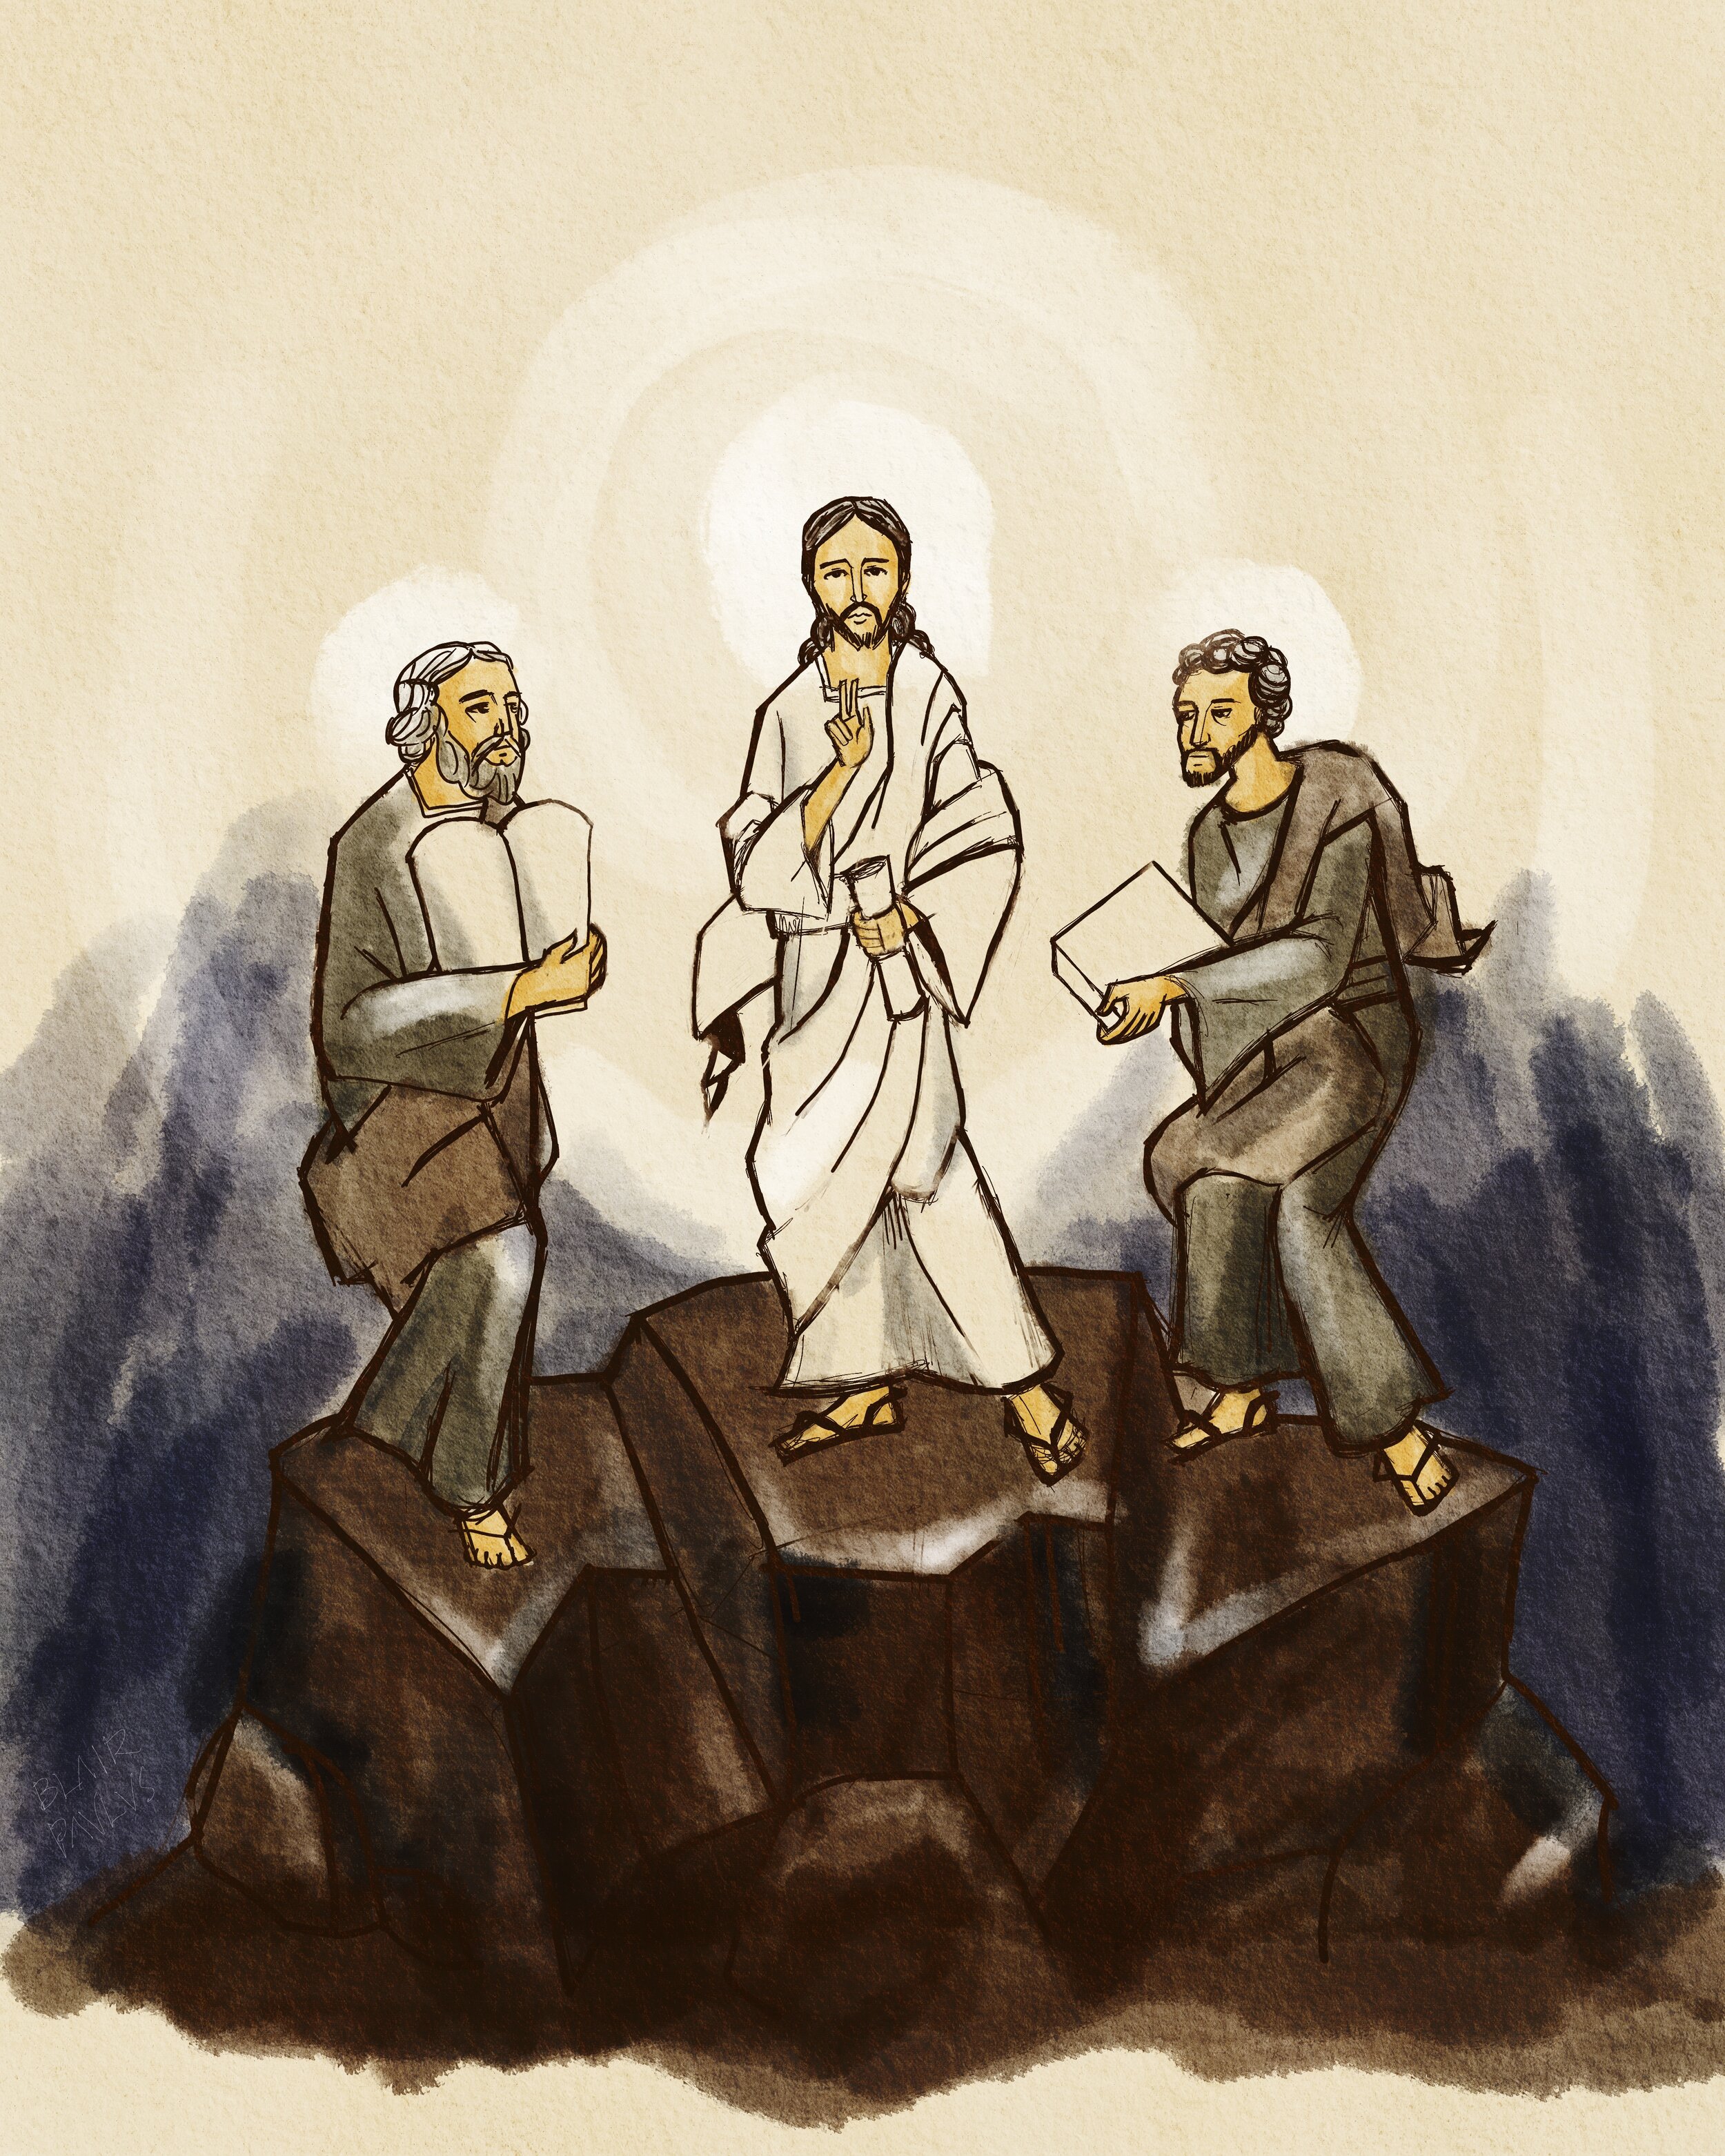 Transfiguration by Brother Blair Nuyda, A.A.